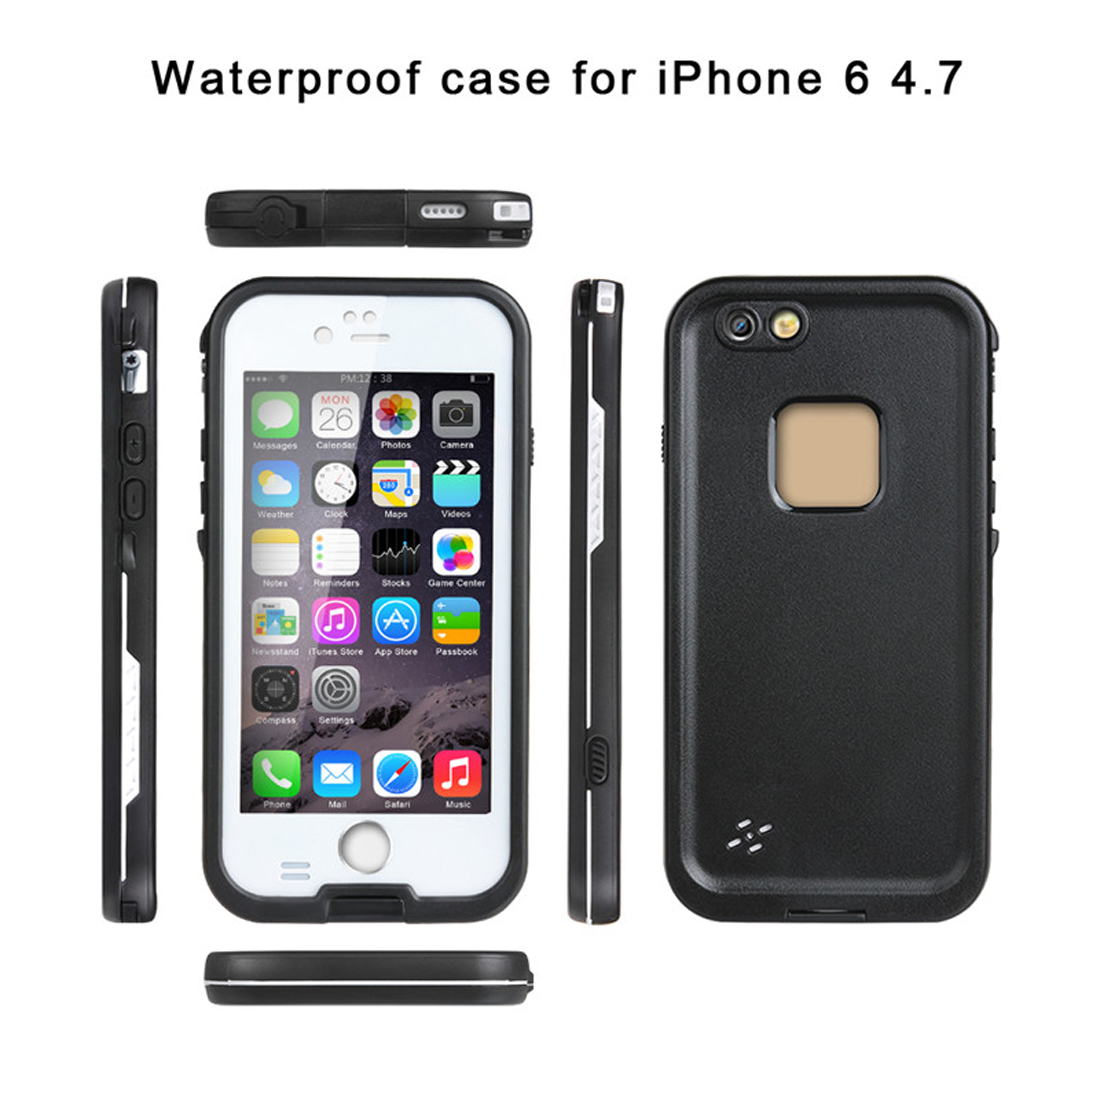 ELEGIANT-for-iPhone-6-47-inch-Waterproof-Case-Transparent-Touch-Screen-Shockproof-Full-Cover-Protect-1890355-4